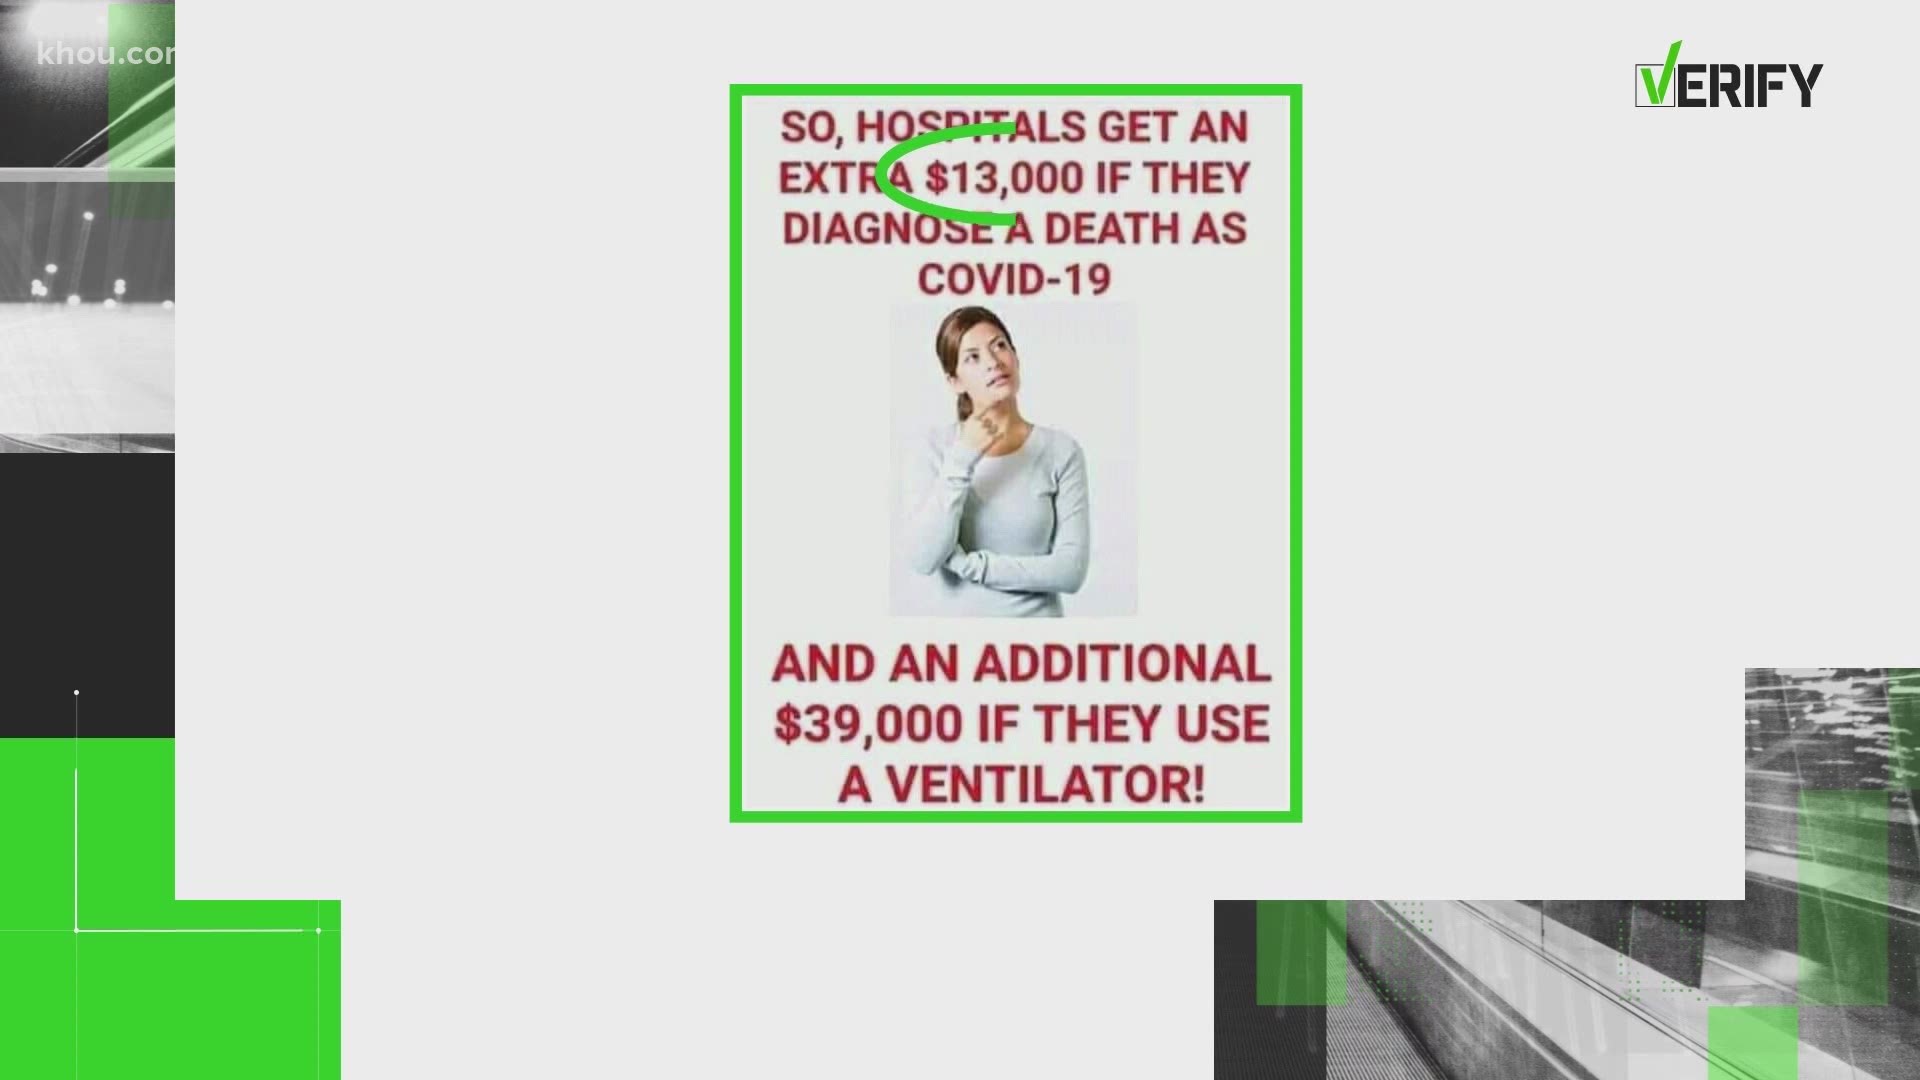 There is a post that has gone viral on social media claiming hospitals are labeling deaths as COVID-19 so that they can get more money from the government. We verify